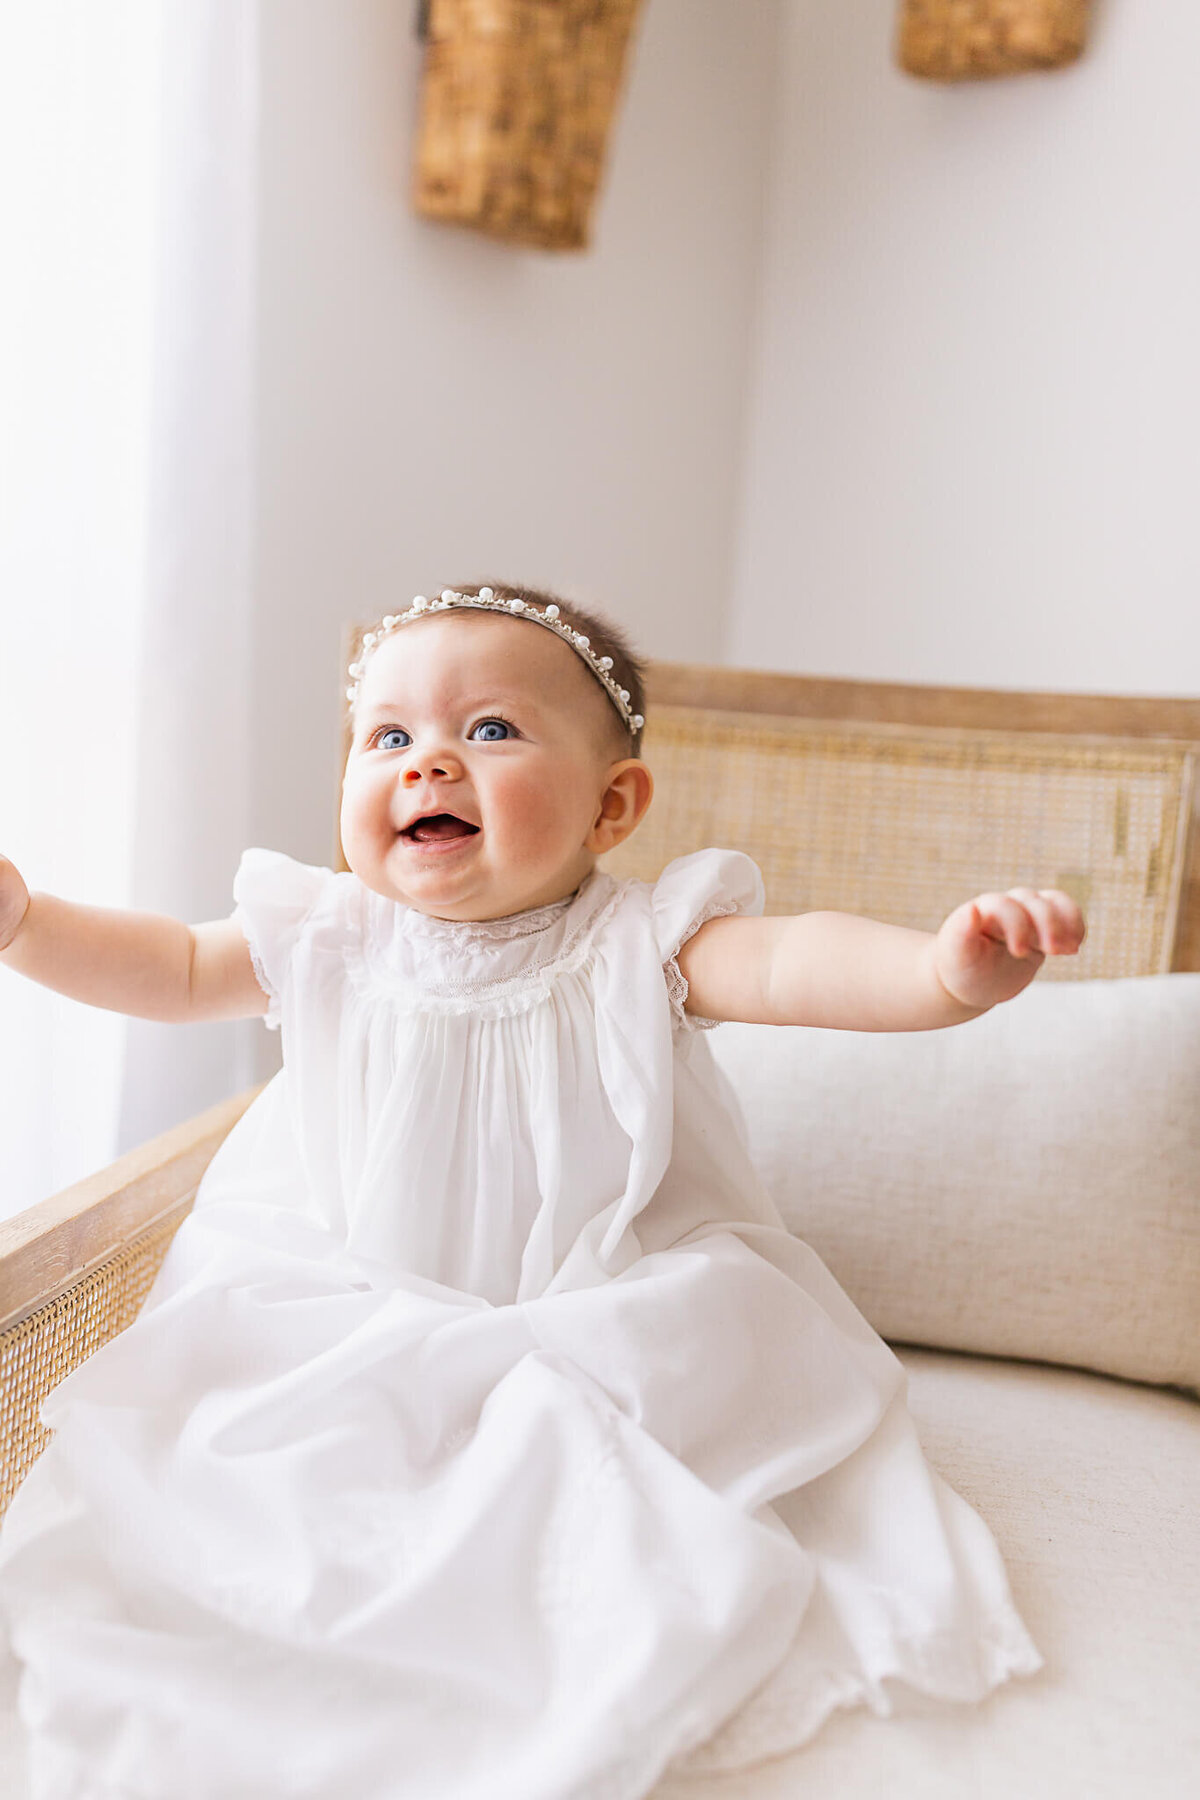 A happy baby girl celebrates while sitting in a chair